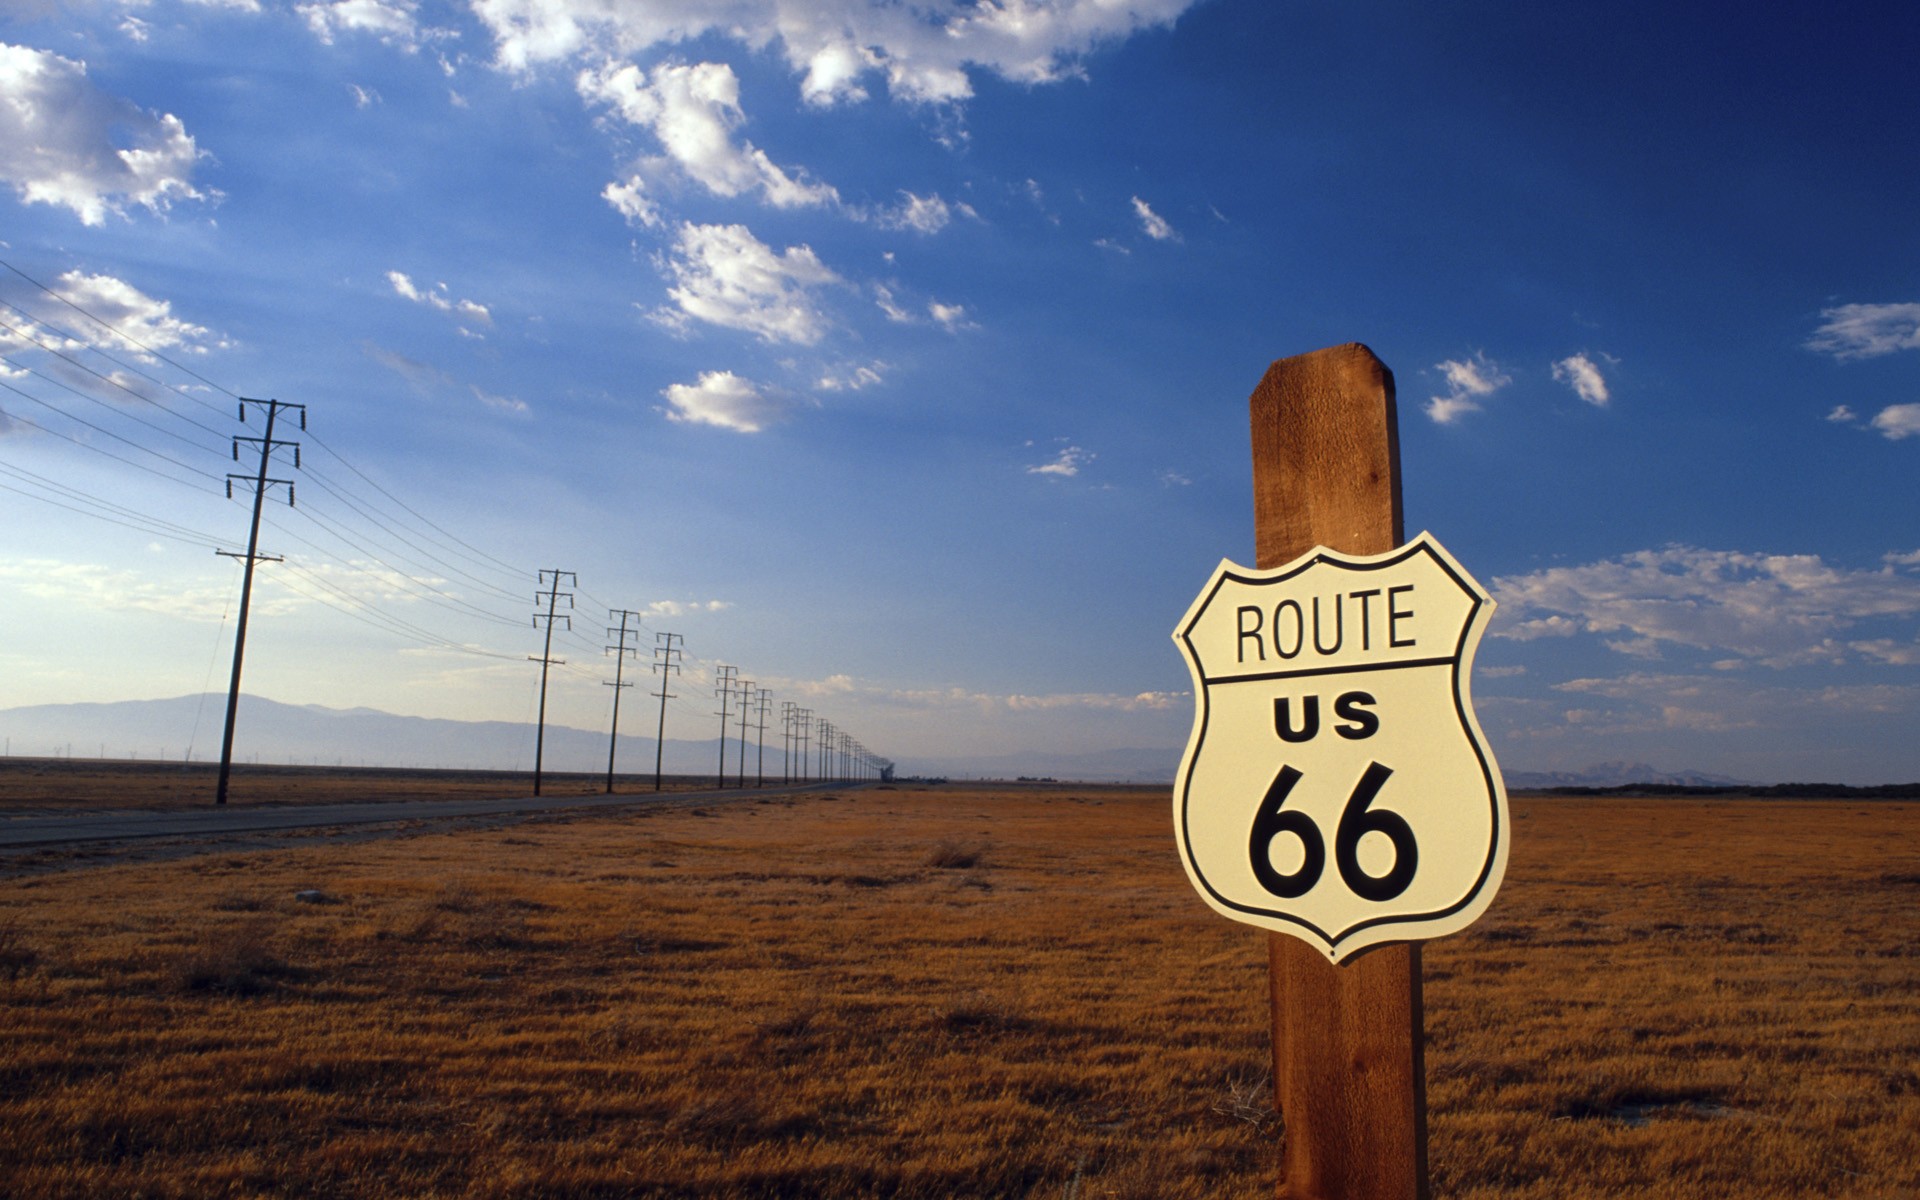 USA, Road, Route 66, Power lines, Field, Clouds, Utility pole Wallpaper